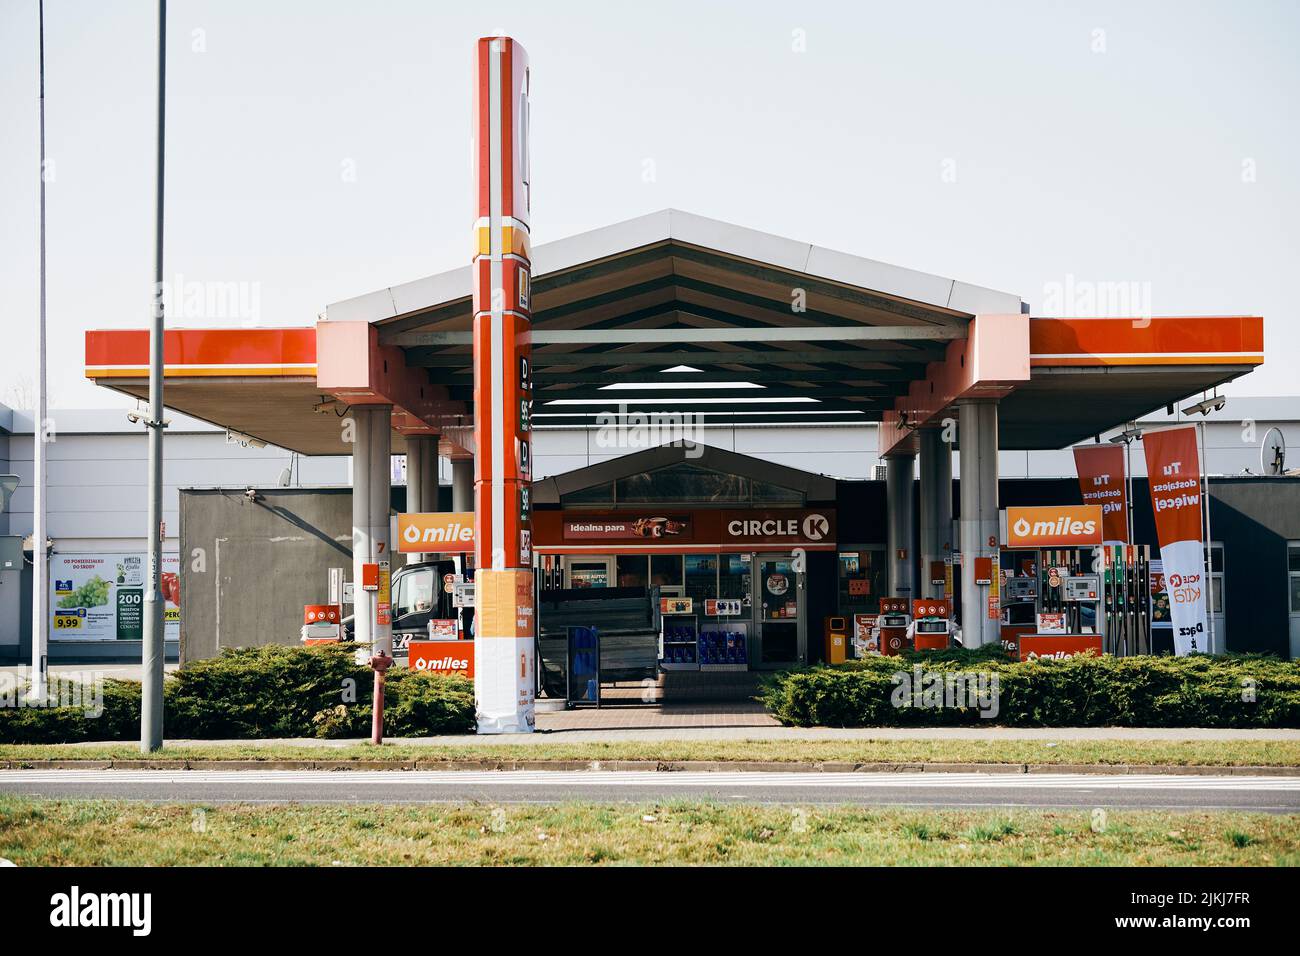 A Circle K gas station with a small shop in Poznan, Poland Stock Photo